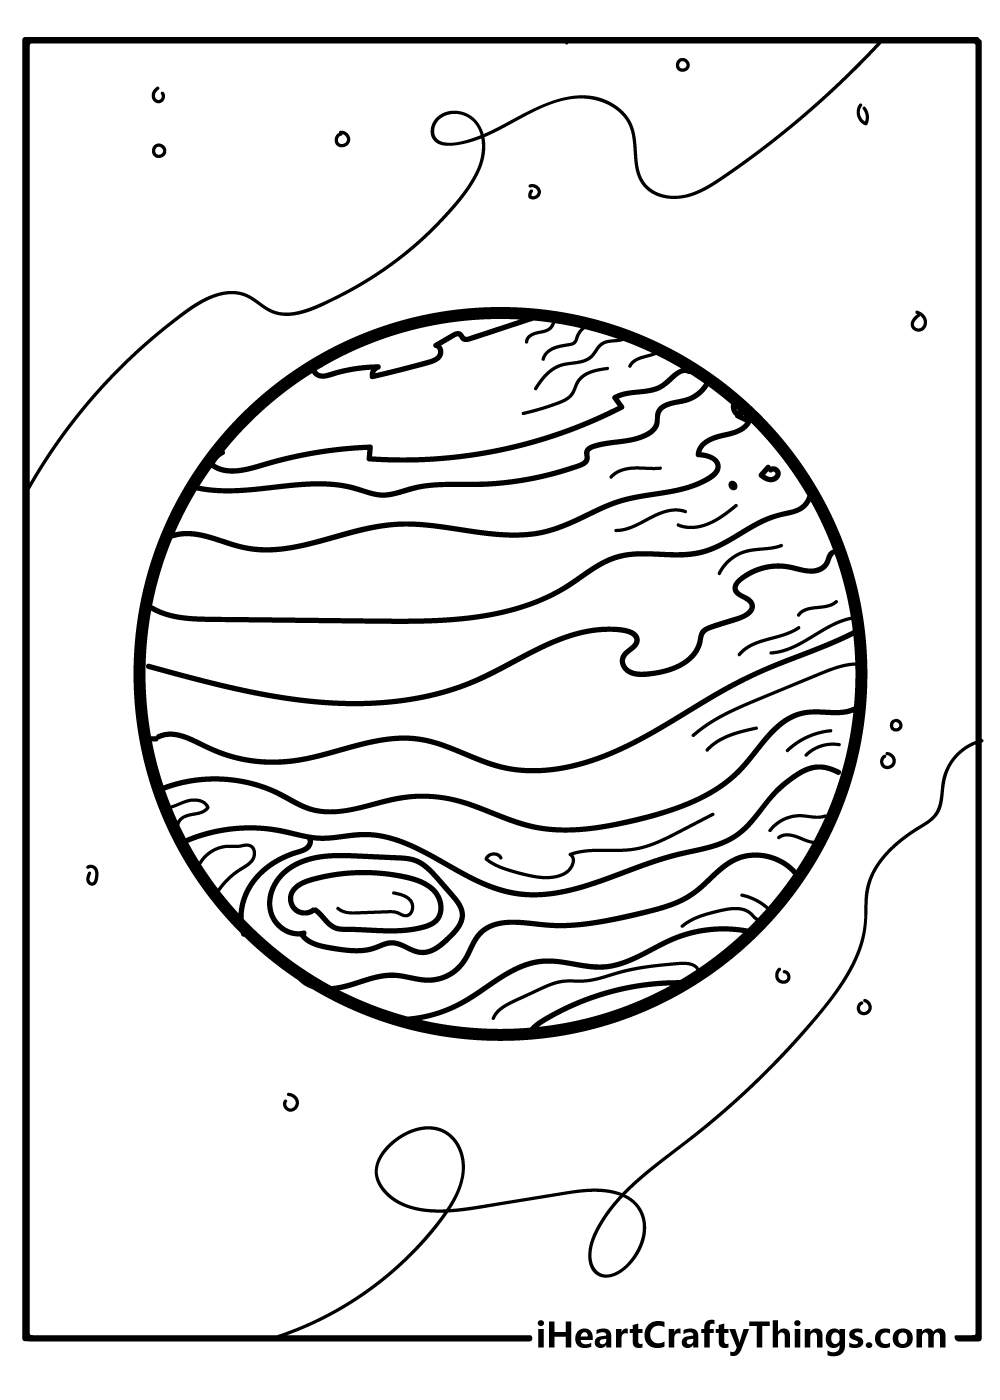 Planets Coloring Original Sheet for children free download